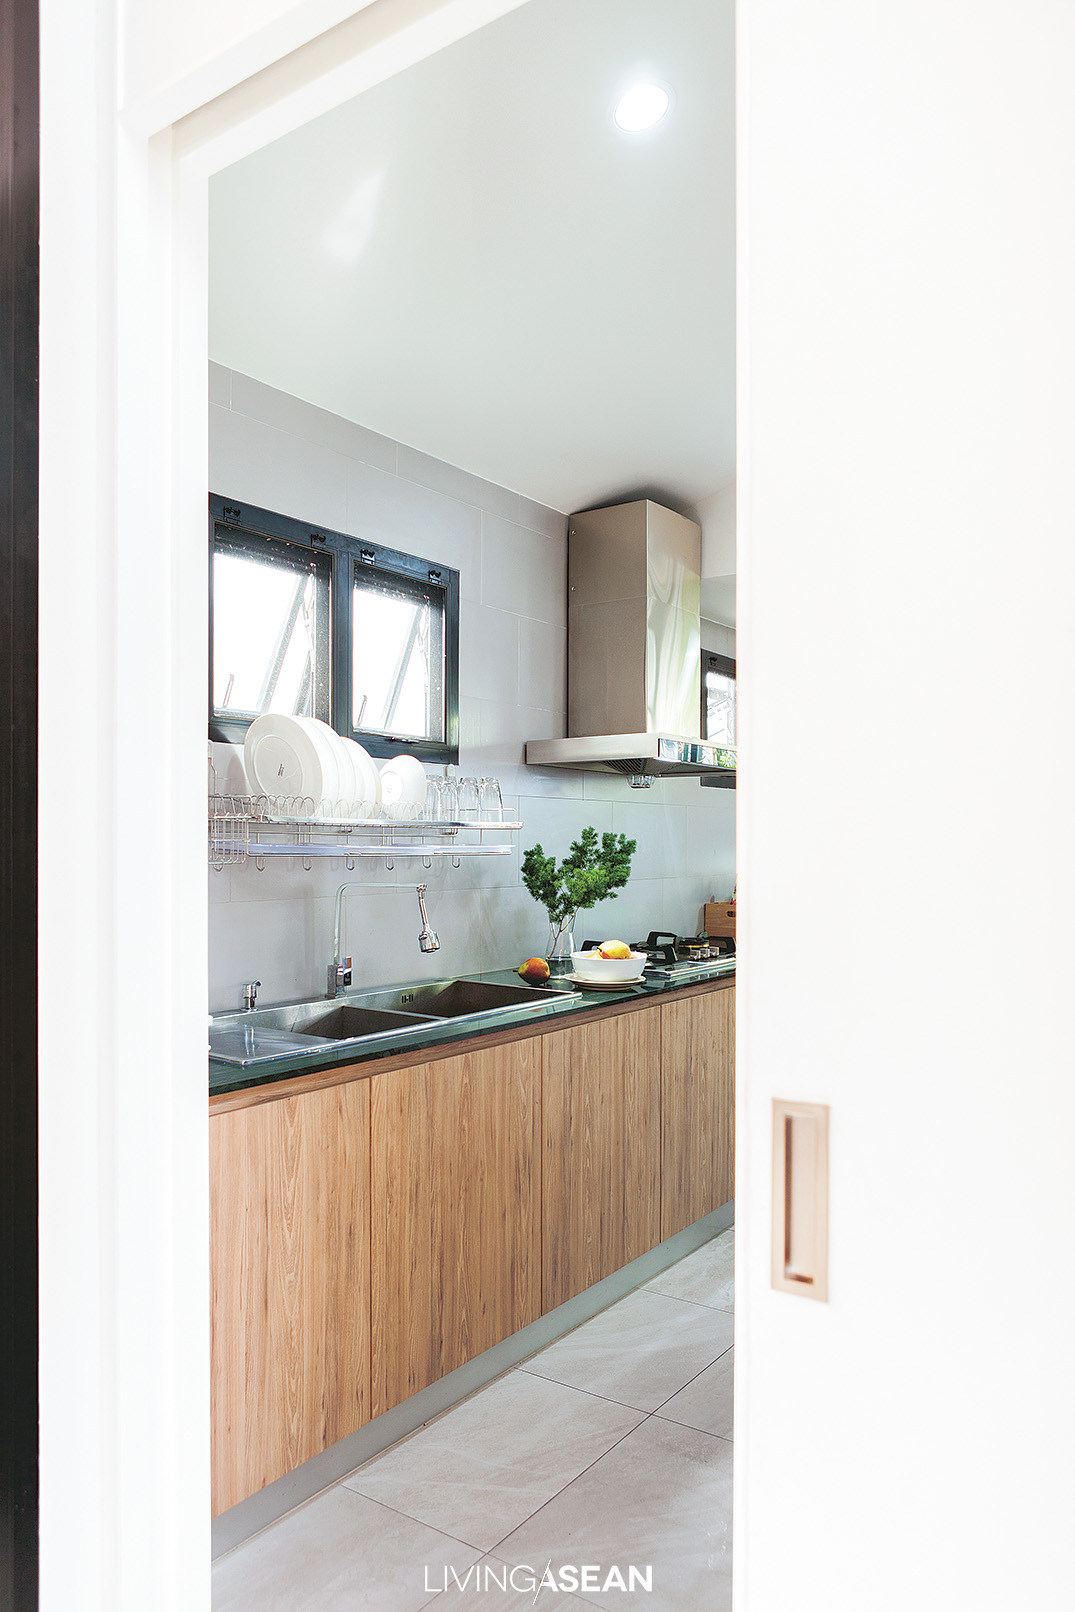 A solid wooden door separates the kitchen from family room. It’s one clever hack to banish the smoke and cooking orders, plus it’s easy to keep clean.